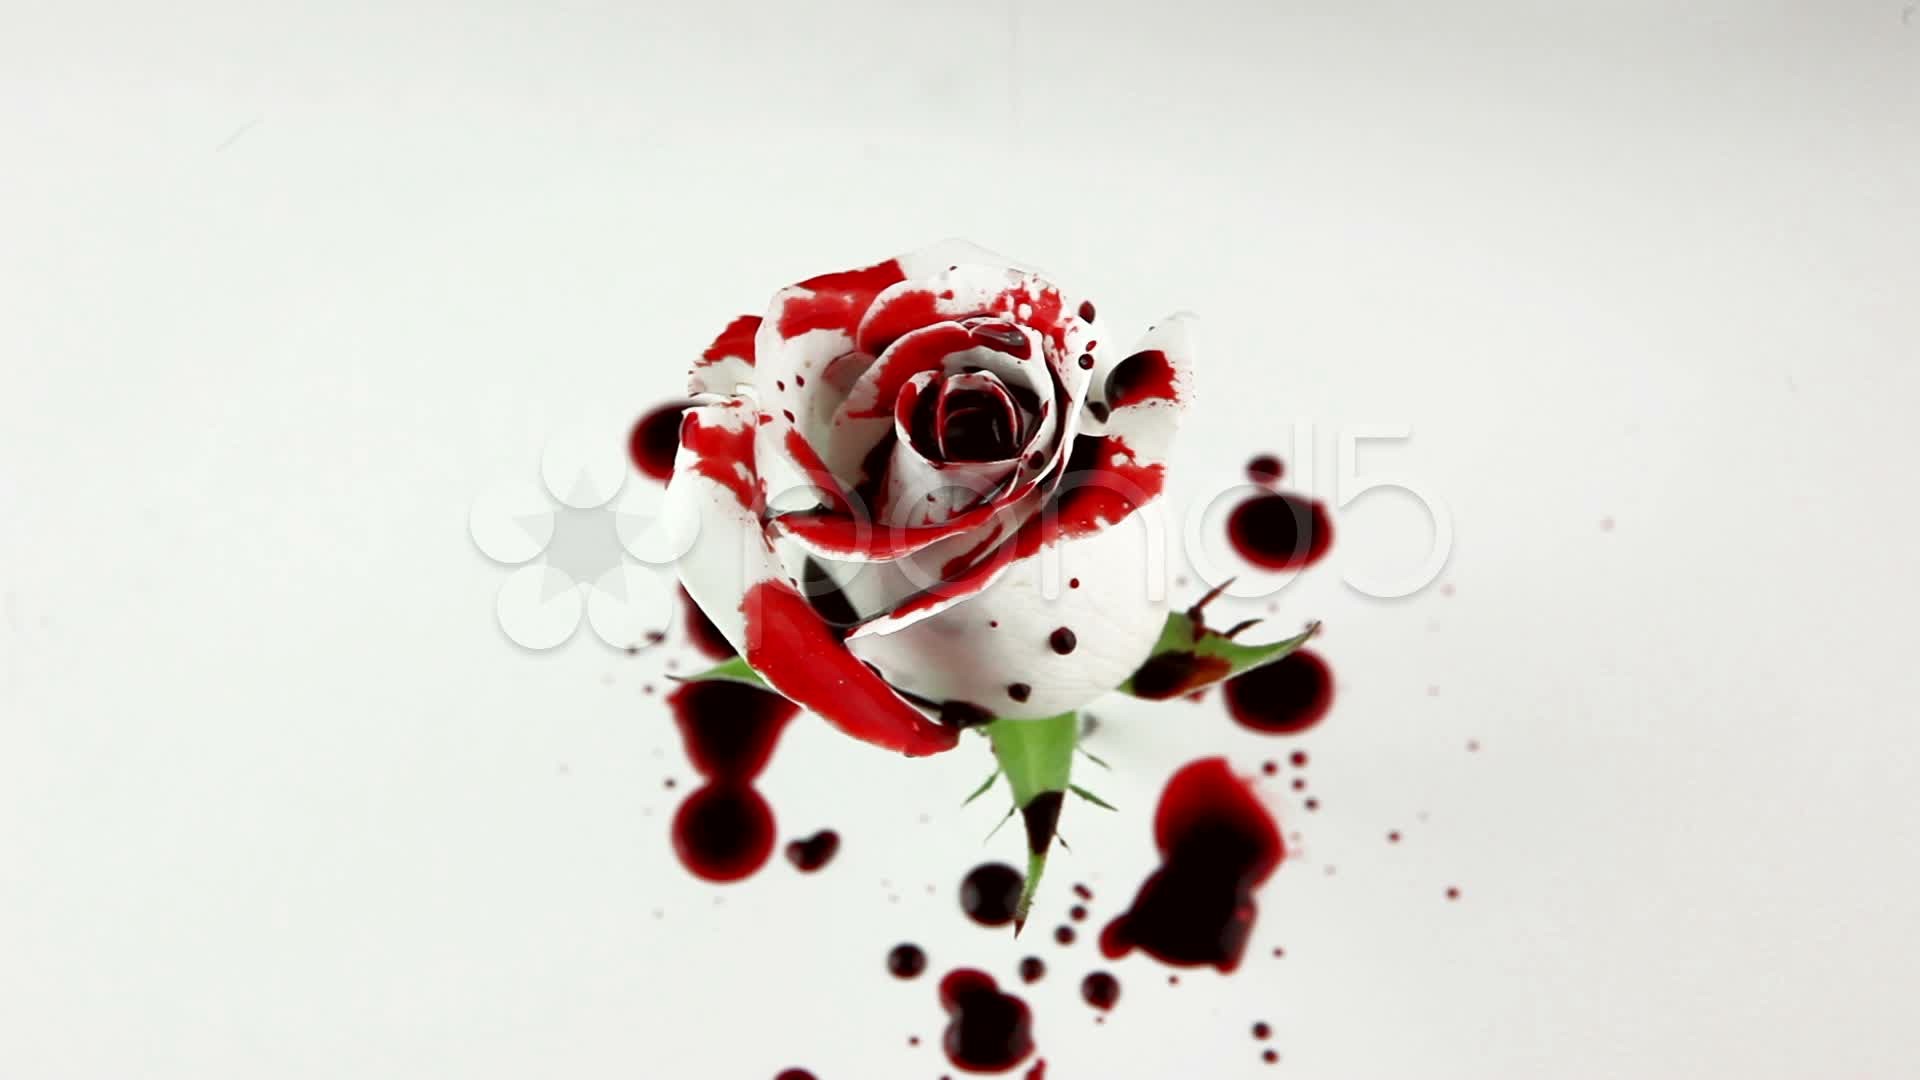 1920x1080 Blood drips on White Rose ~ Stock Video #22409670 | Pond5